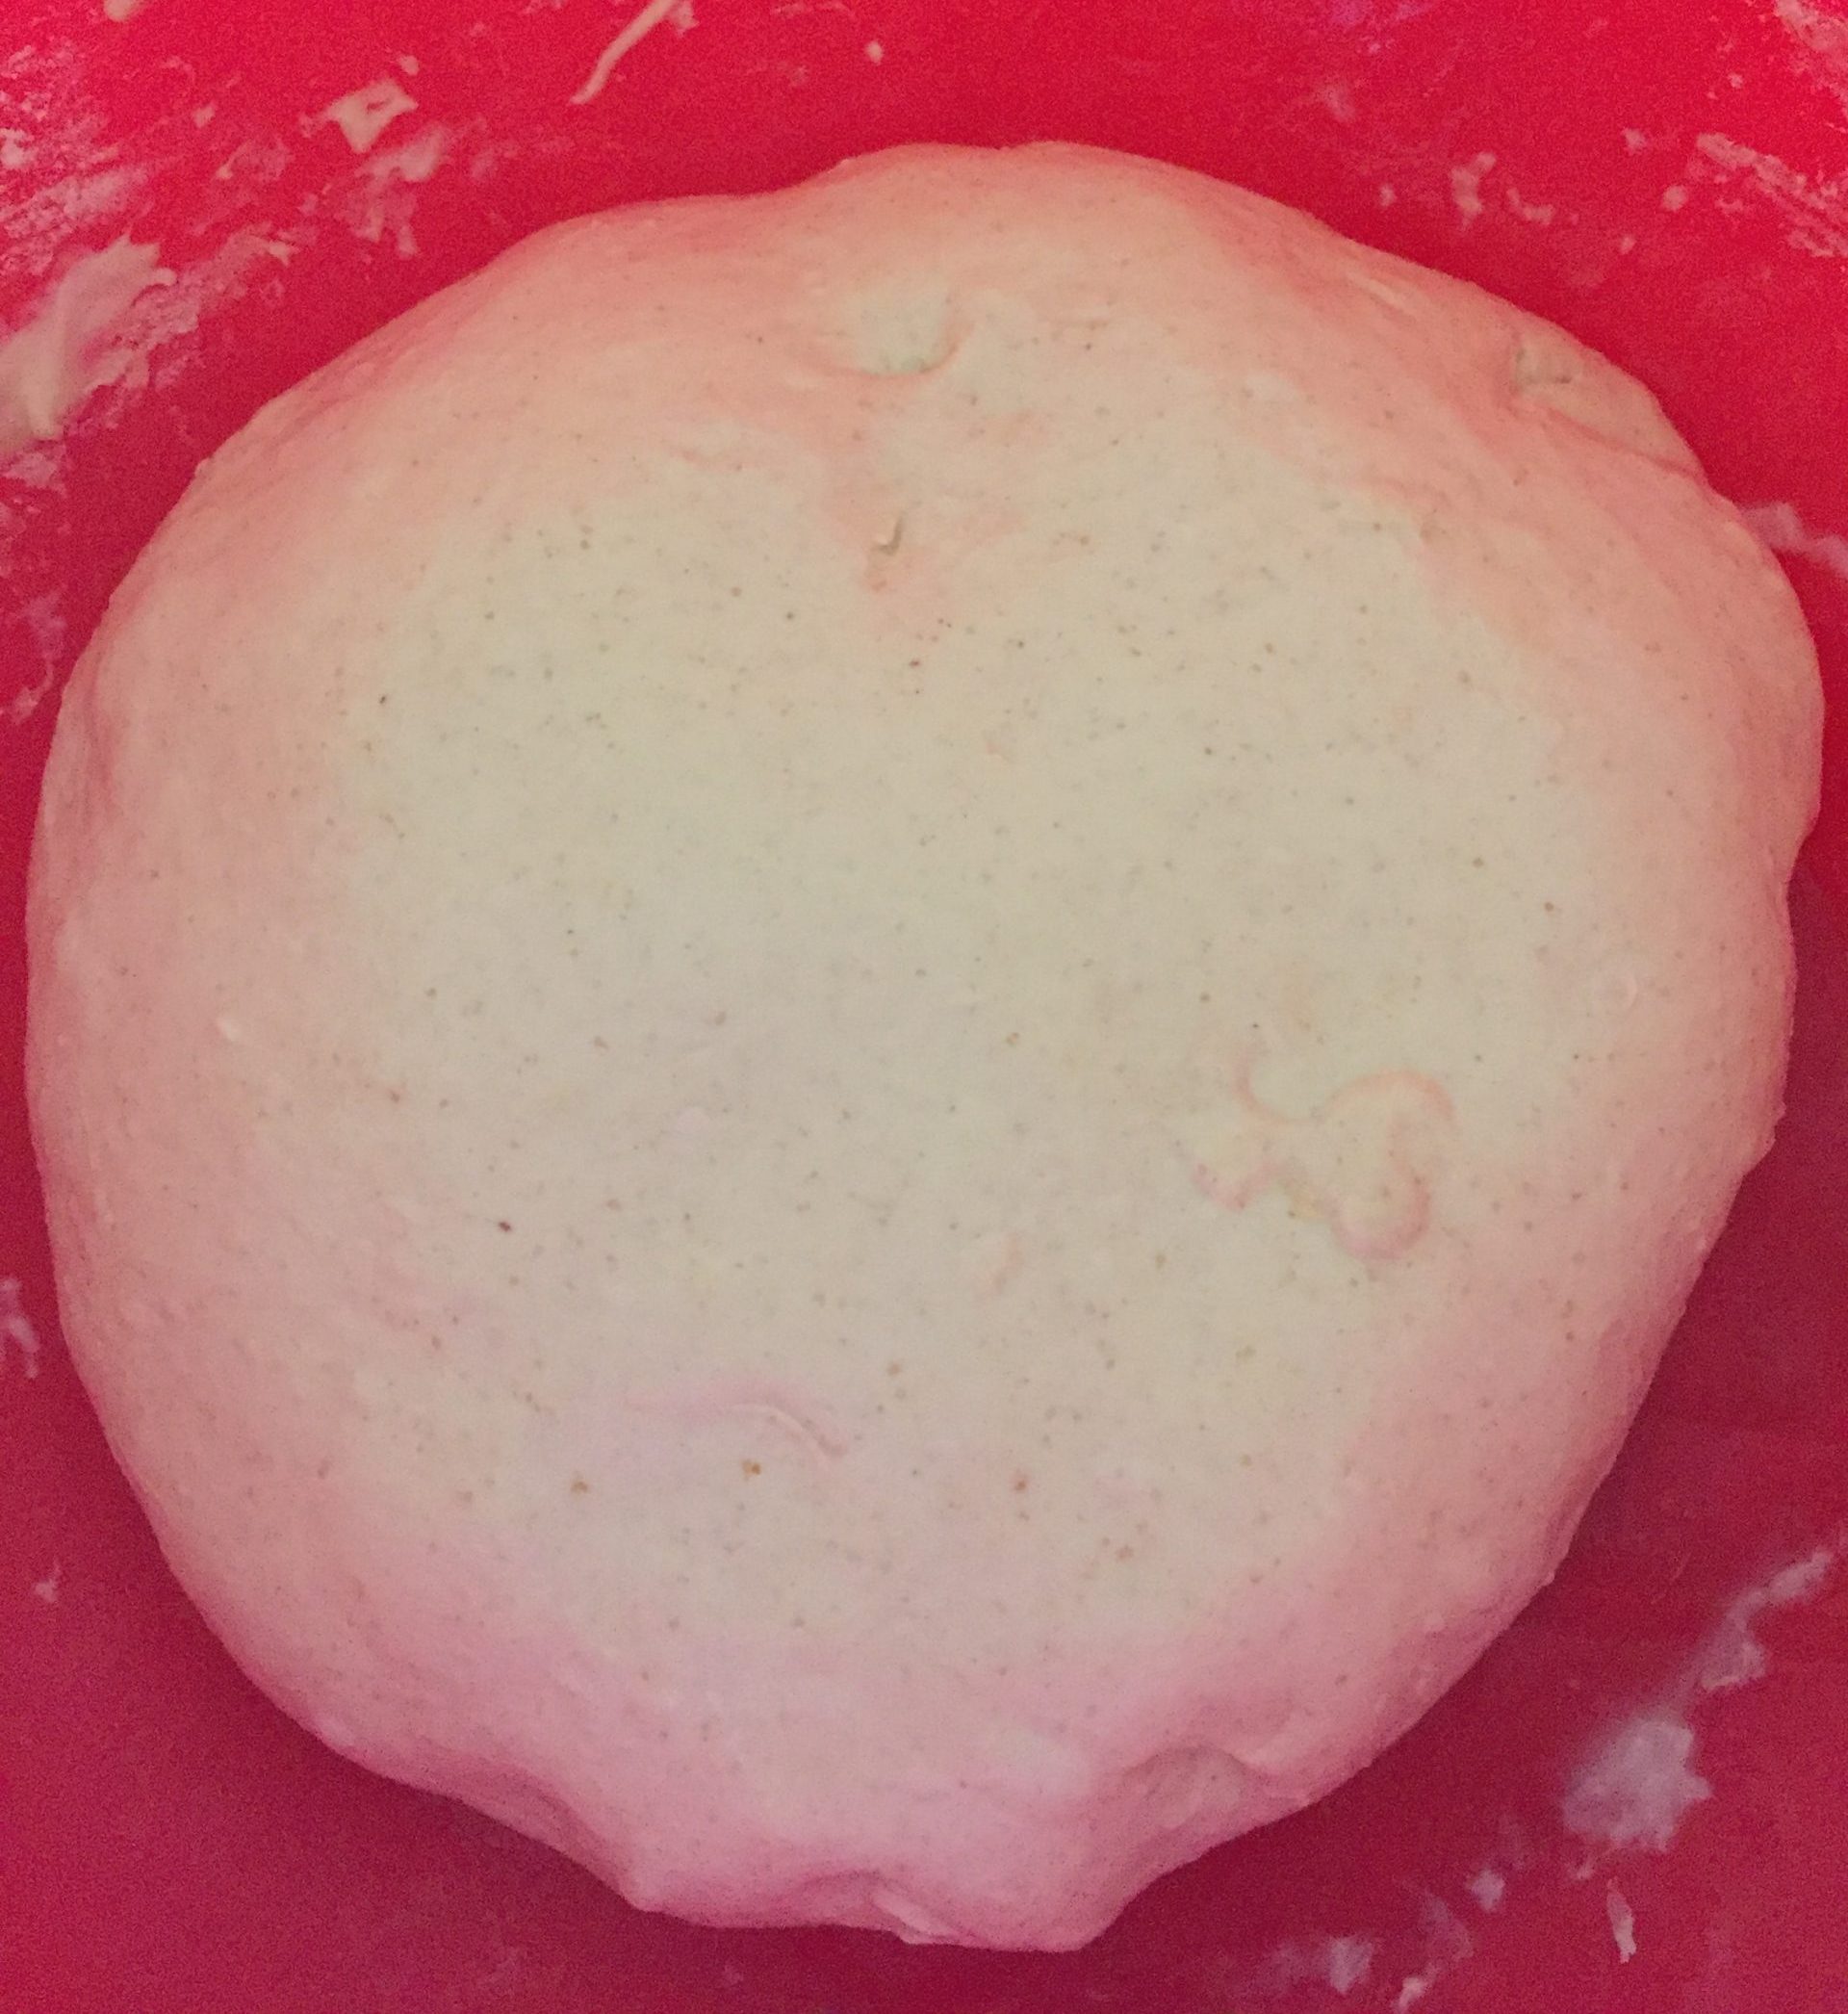 Dough after kneading bread recipe